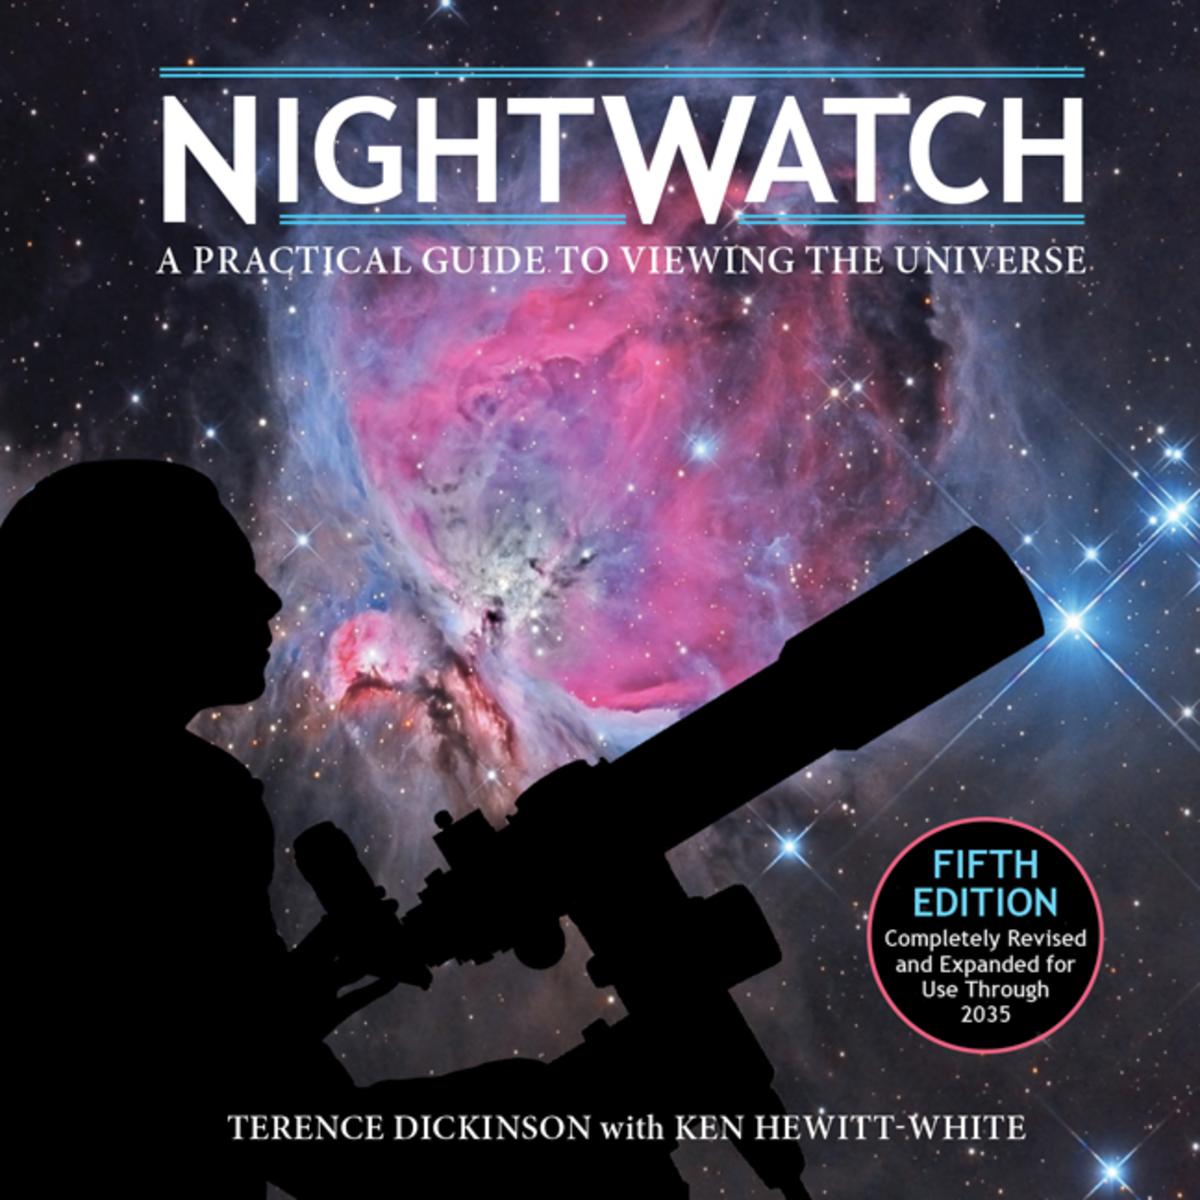 NightWatch - A Practical Guide to Viewing the Universe